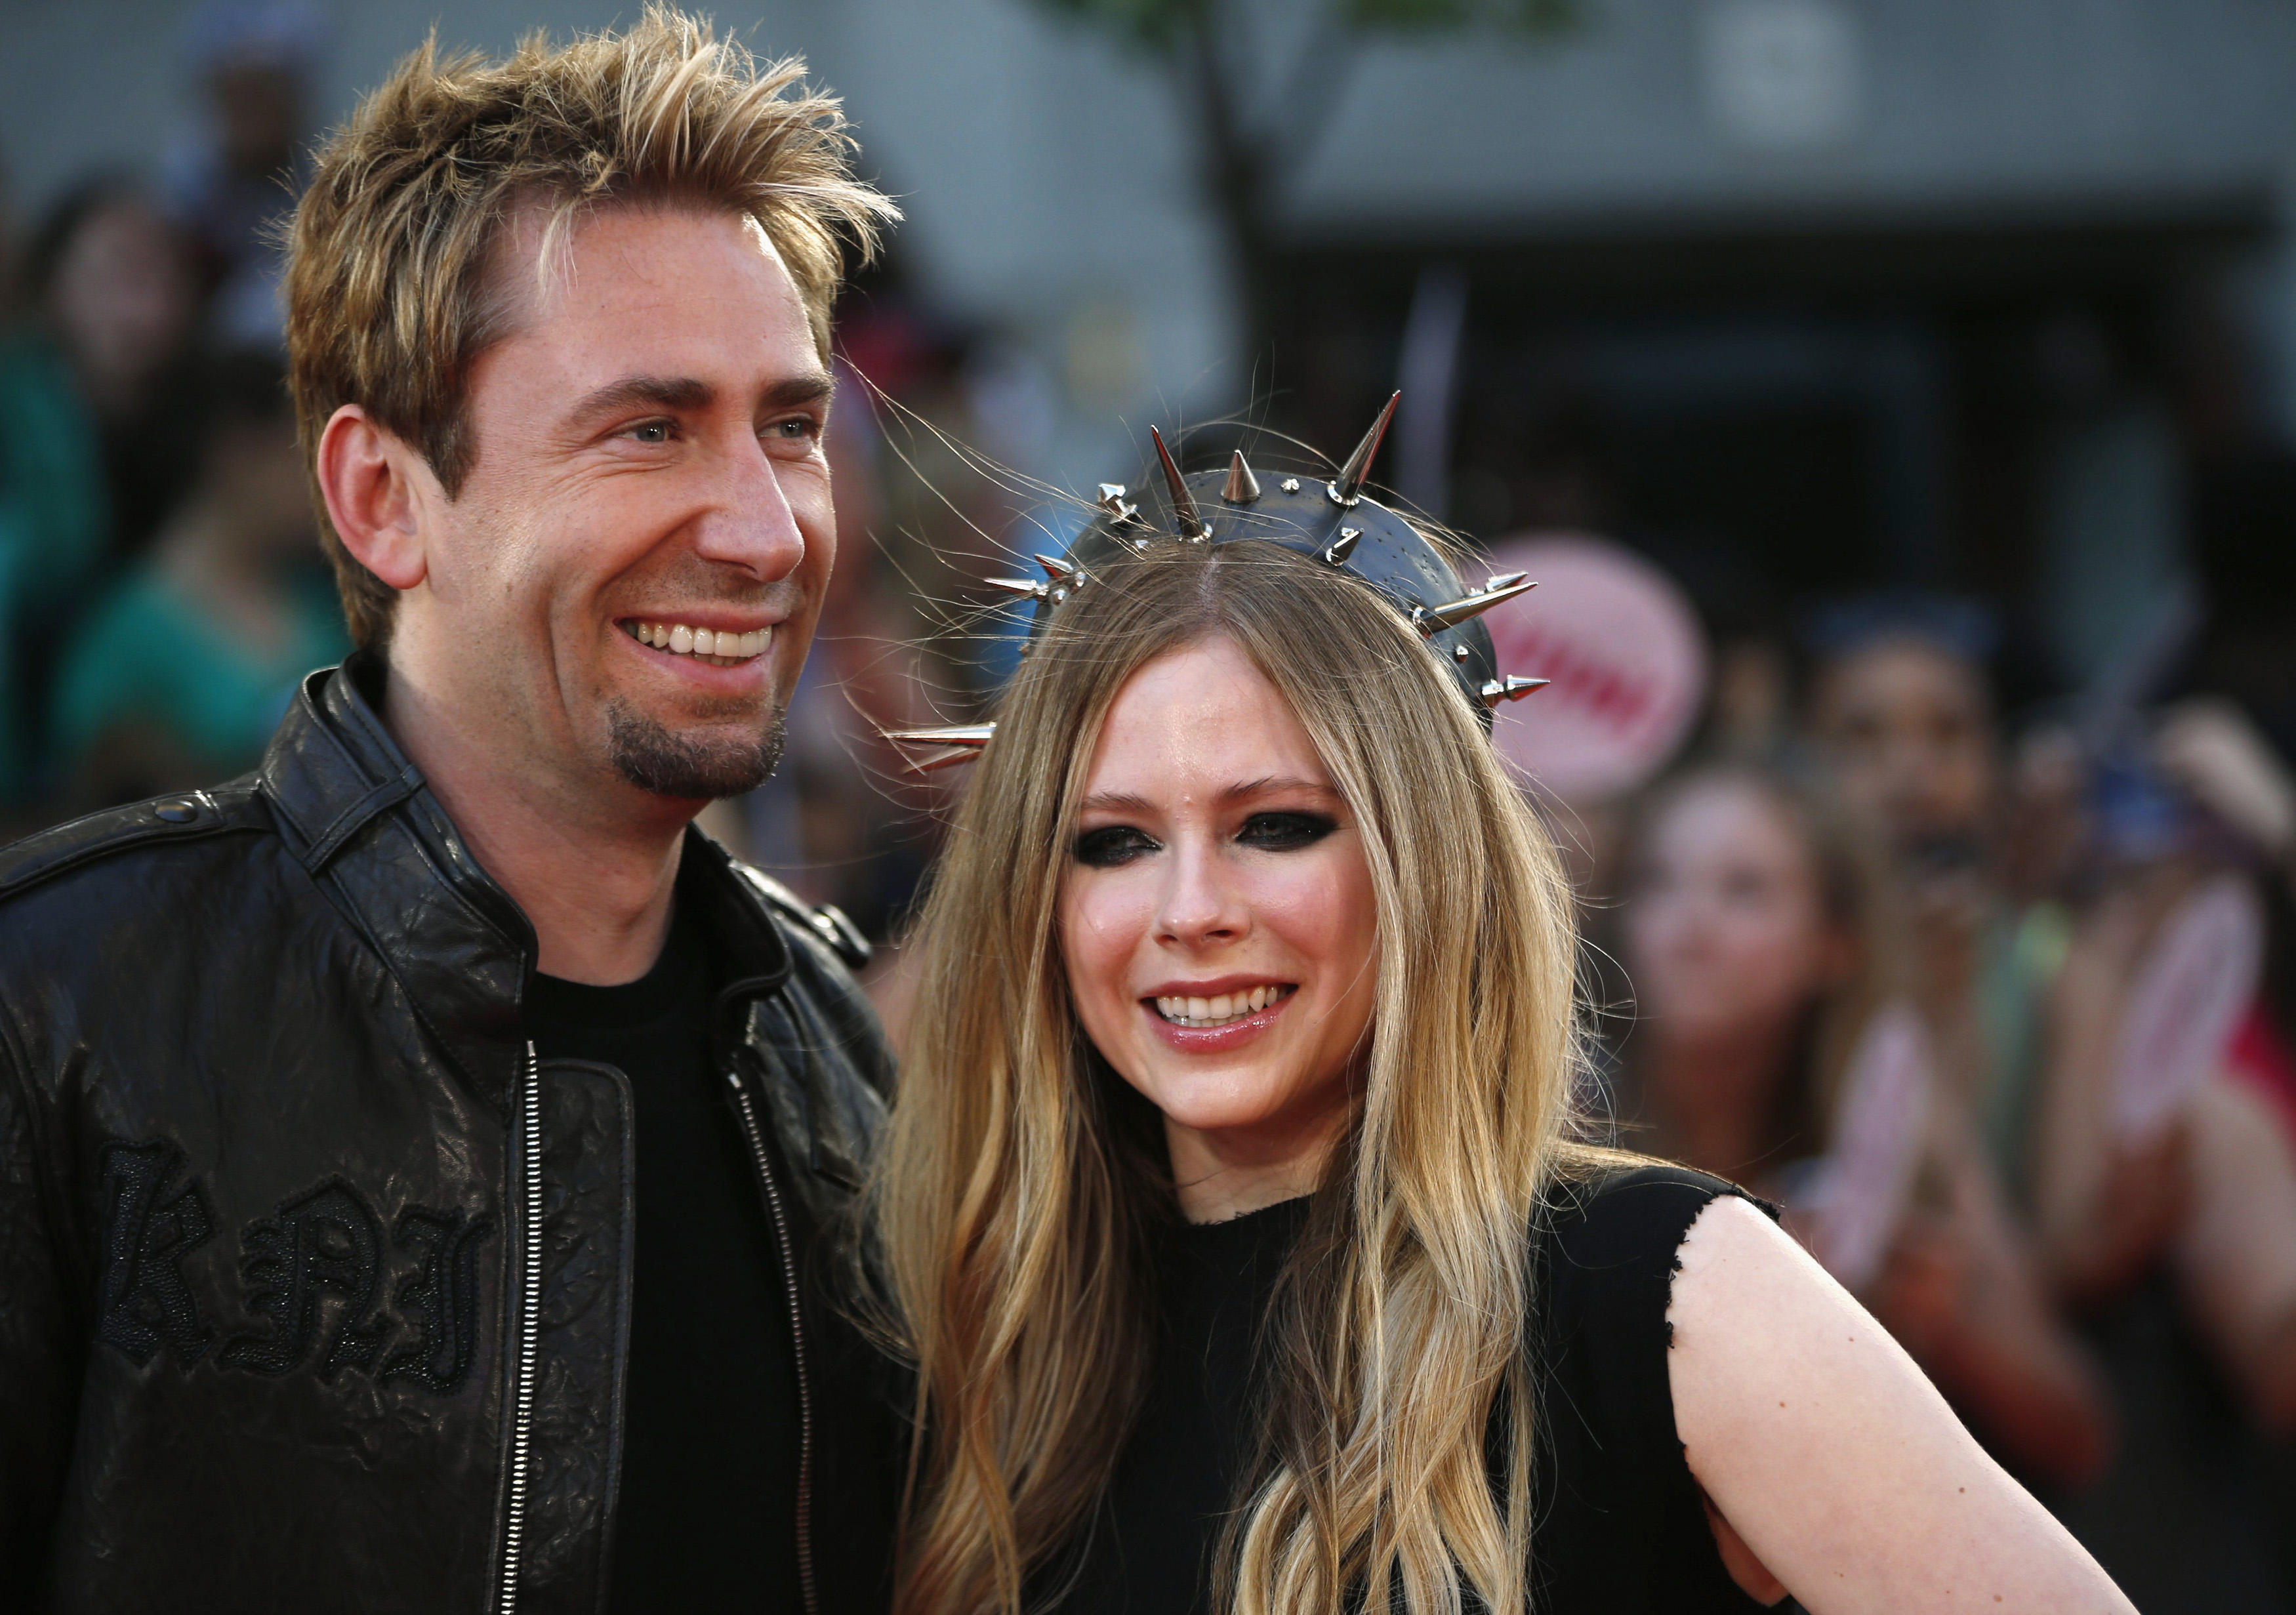 Singers Lavigne and Kroeger arrive on the red carpet for the MuchMusic Video Awards in Toronto